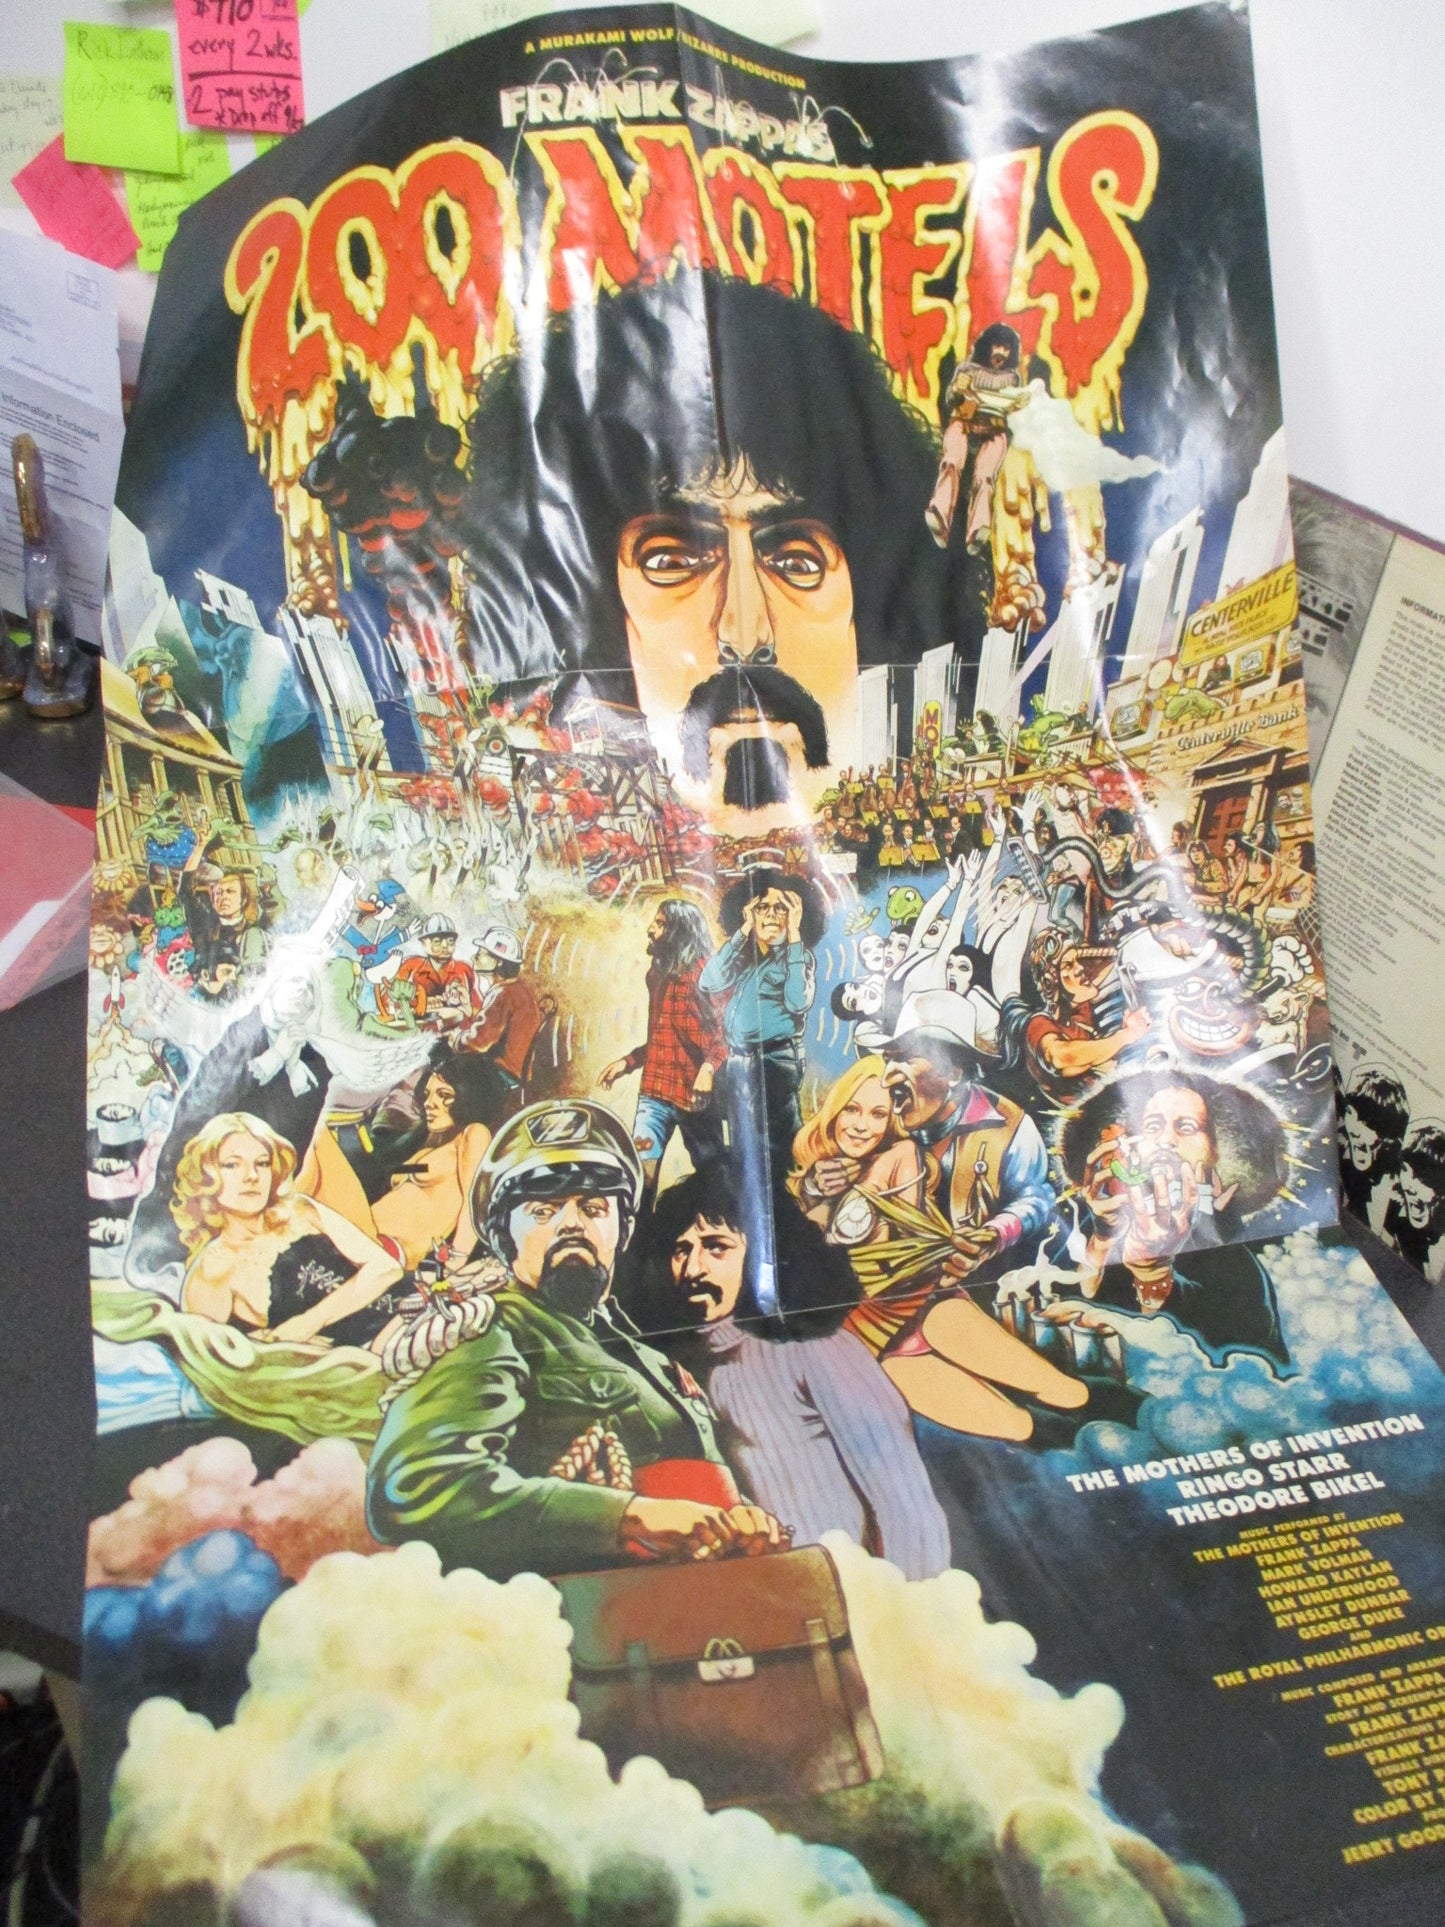 Frank Zappa Double Signed Album cover 200 Motels